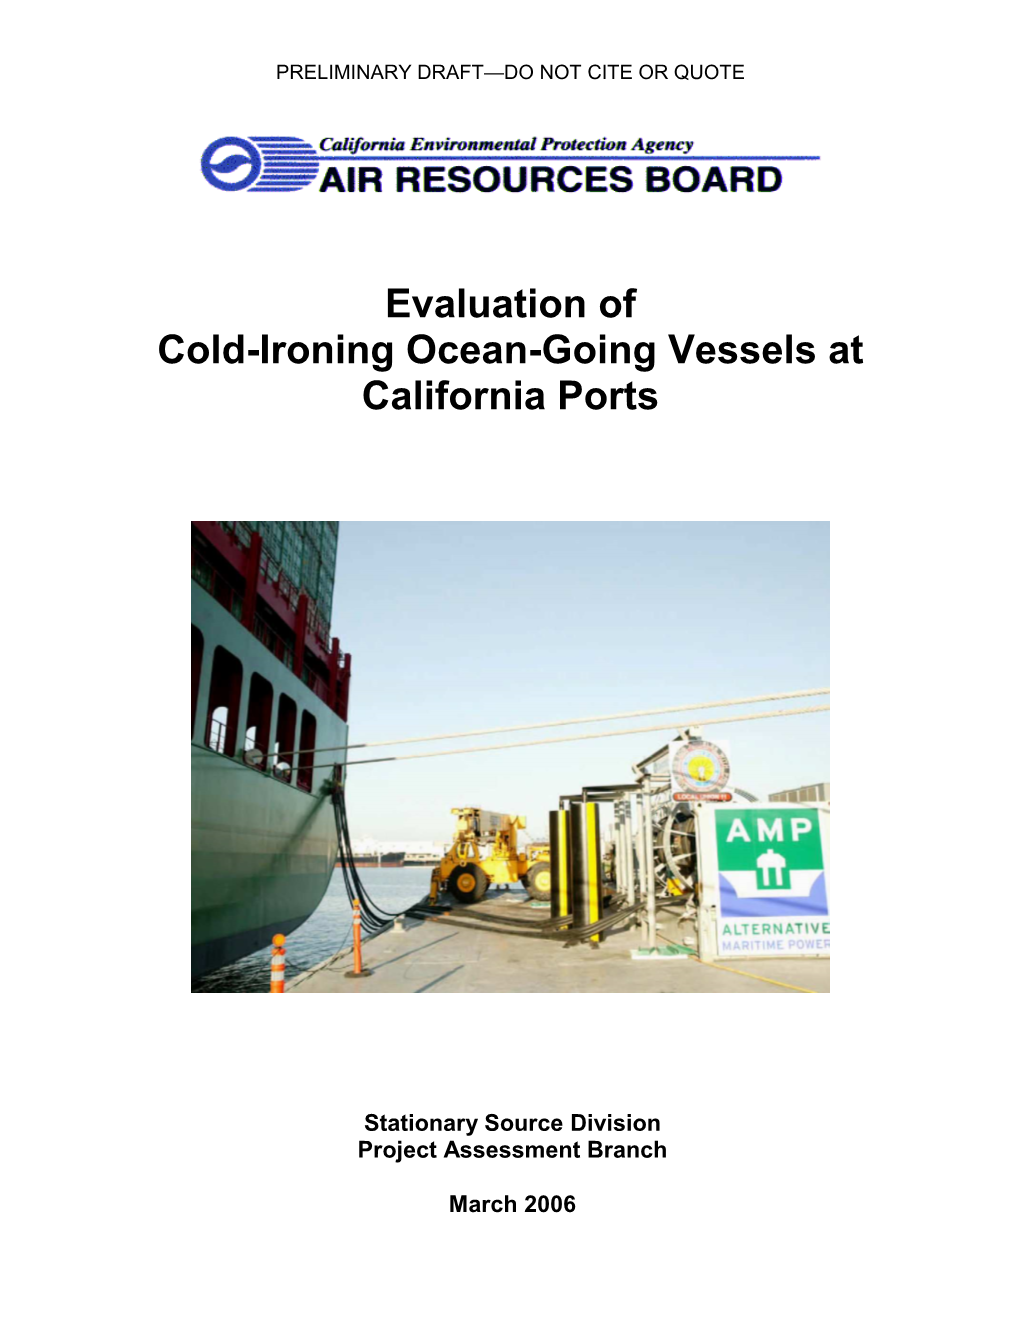 Evaluation of Cold-Ironing Ocean-Going Vessels at California Ports